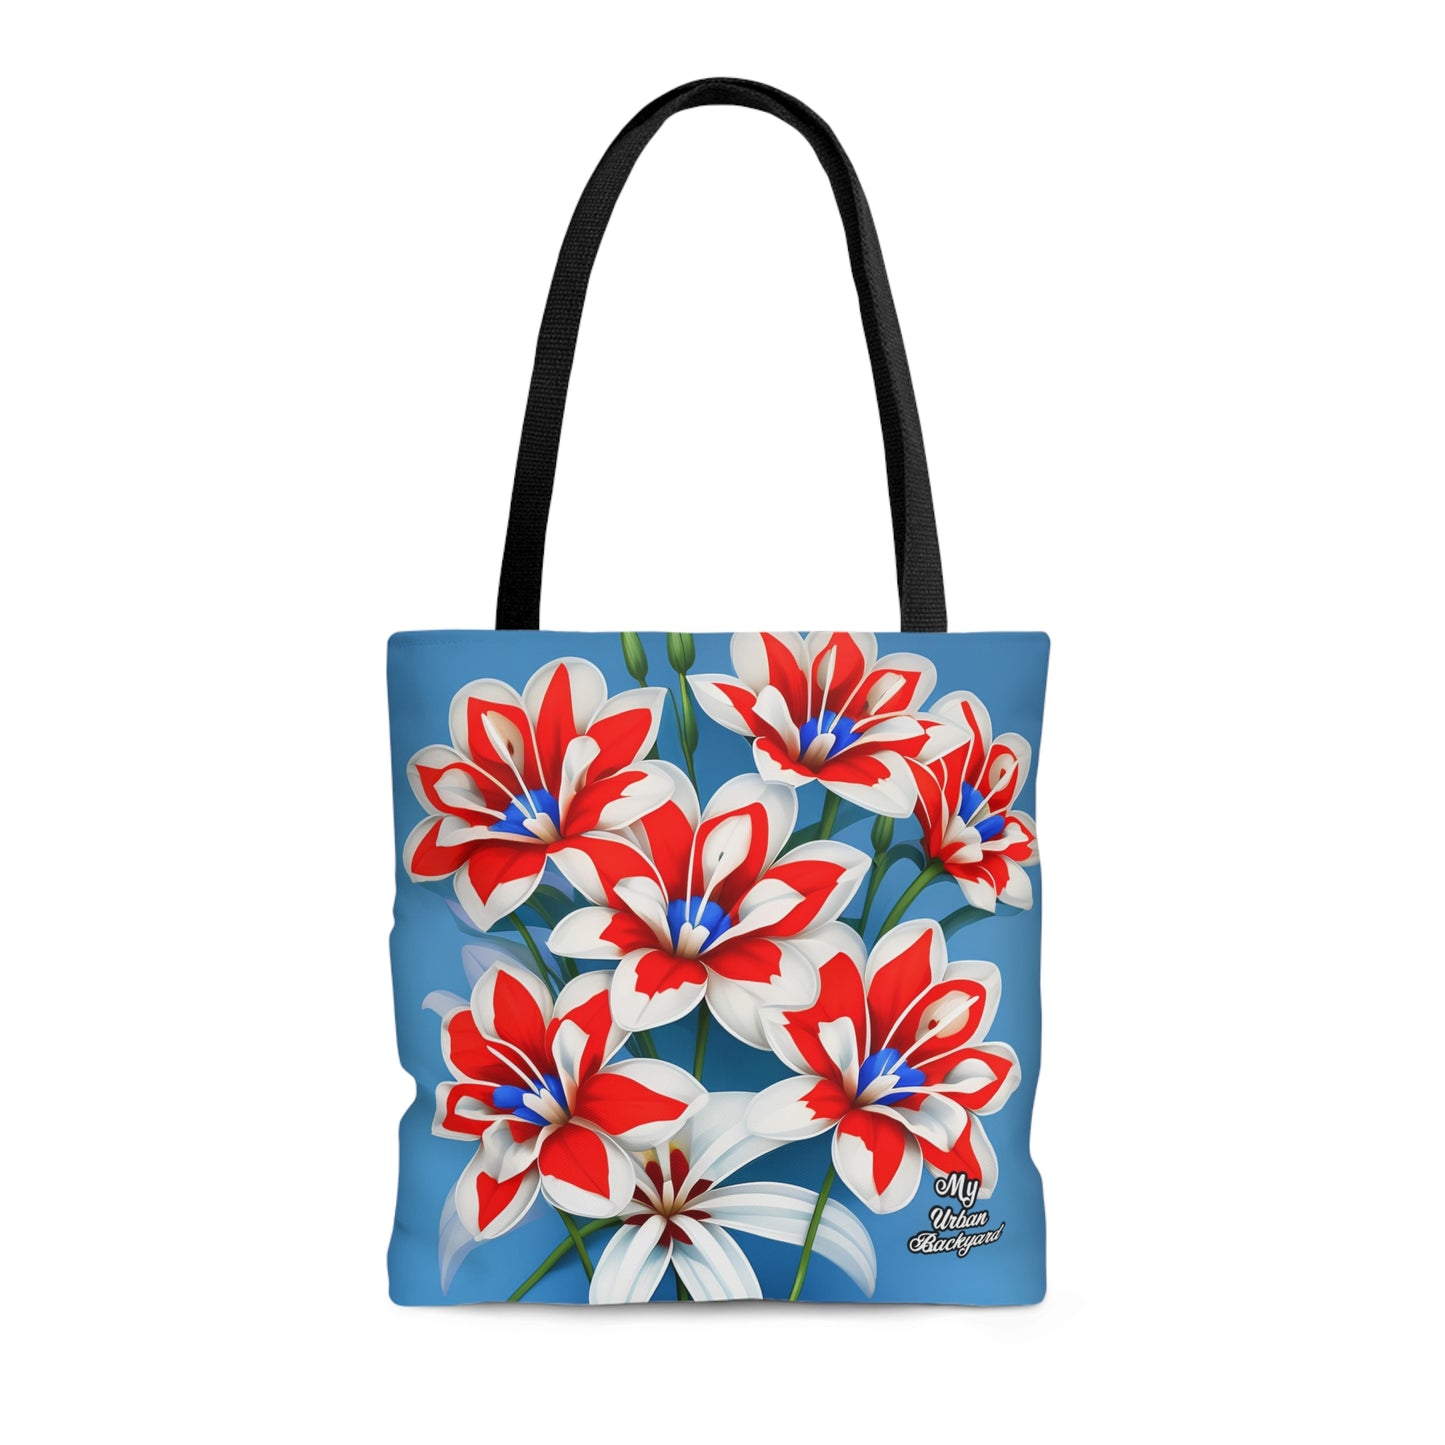 Bouquet of Red White and Blue Flowers, Tote Bag for Everyday Use - Durable and Functional